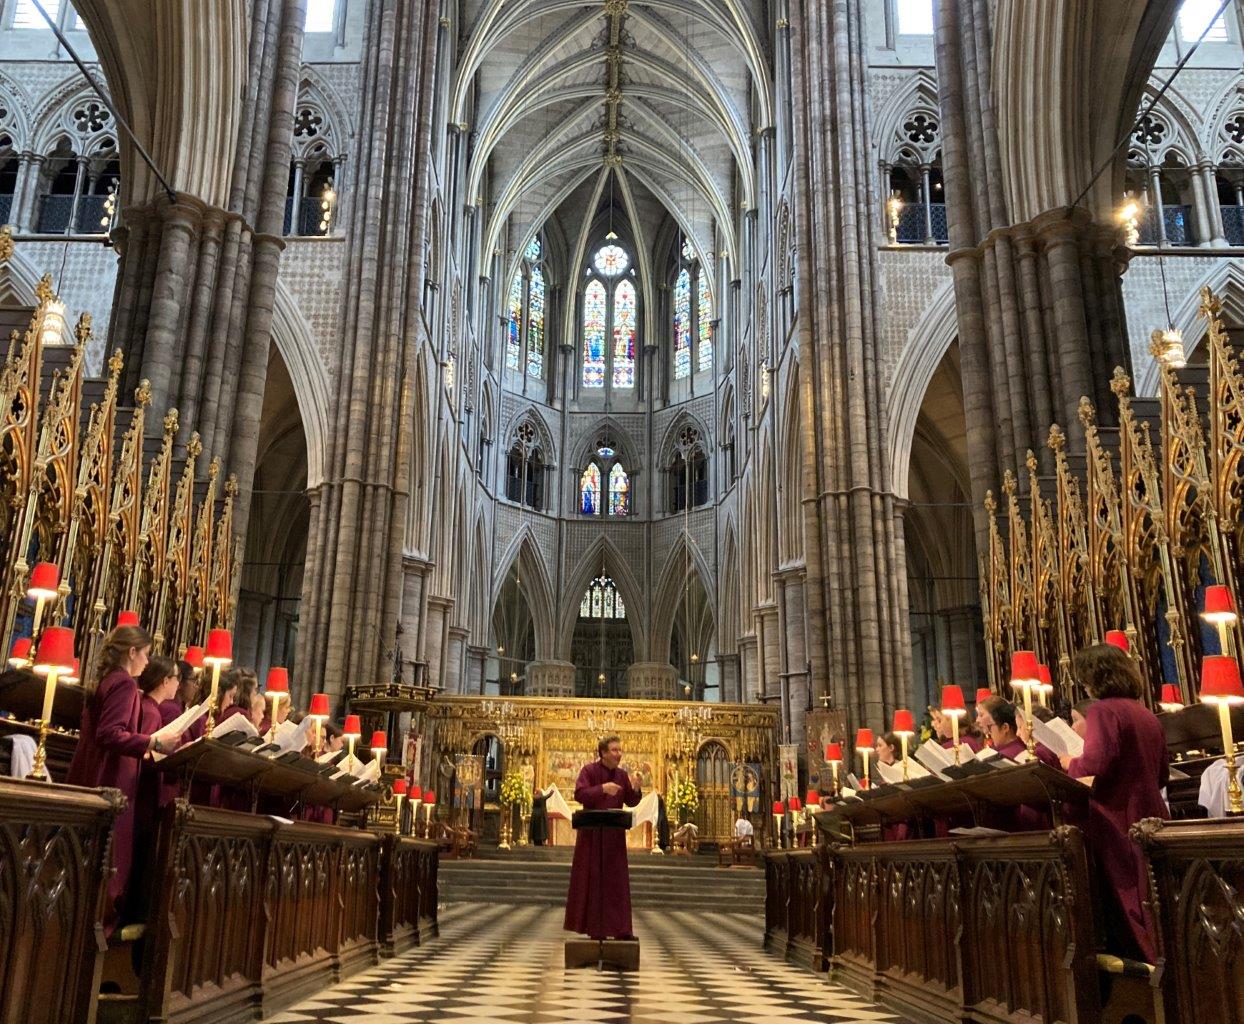 A group of Choristers sing in Westminster Abbey